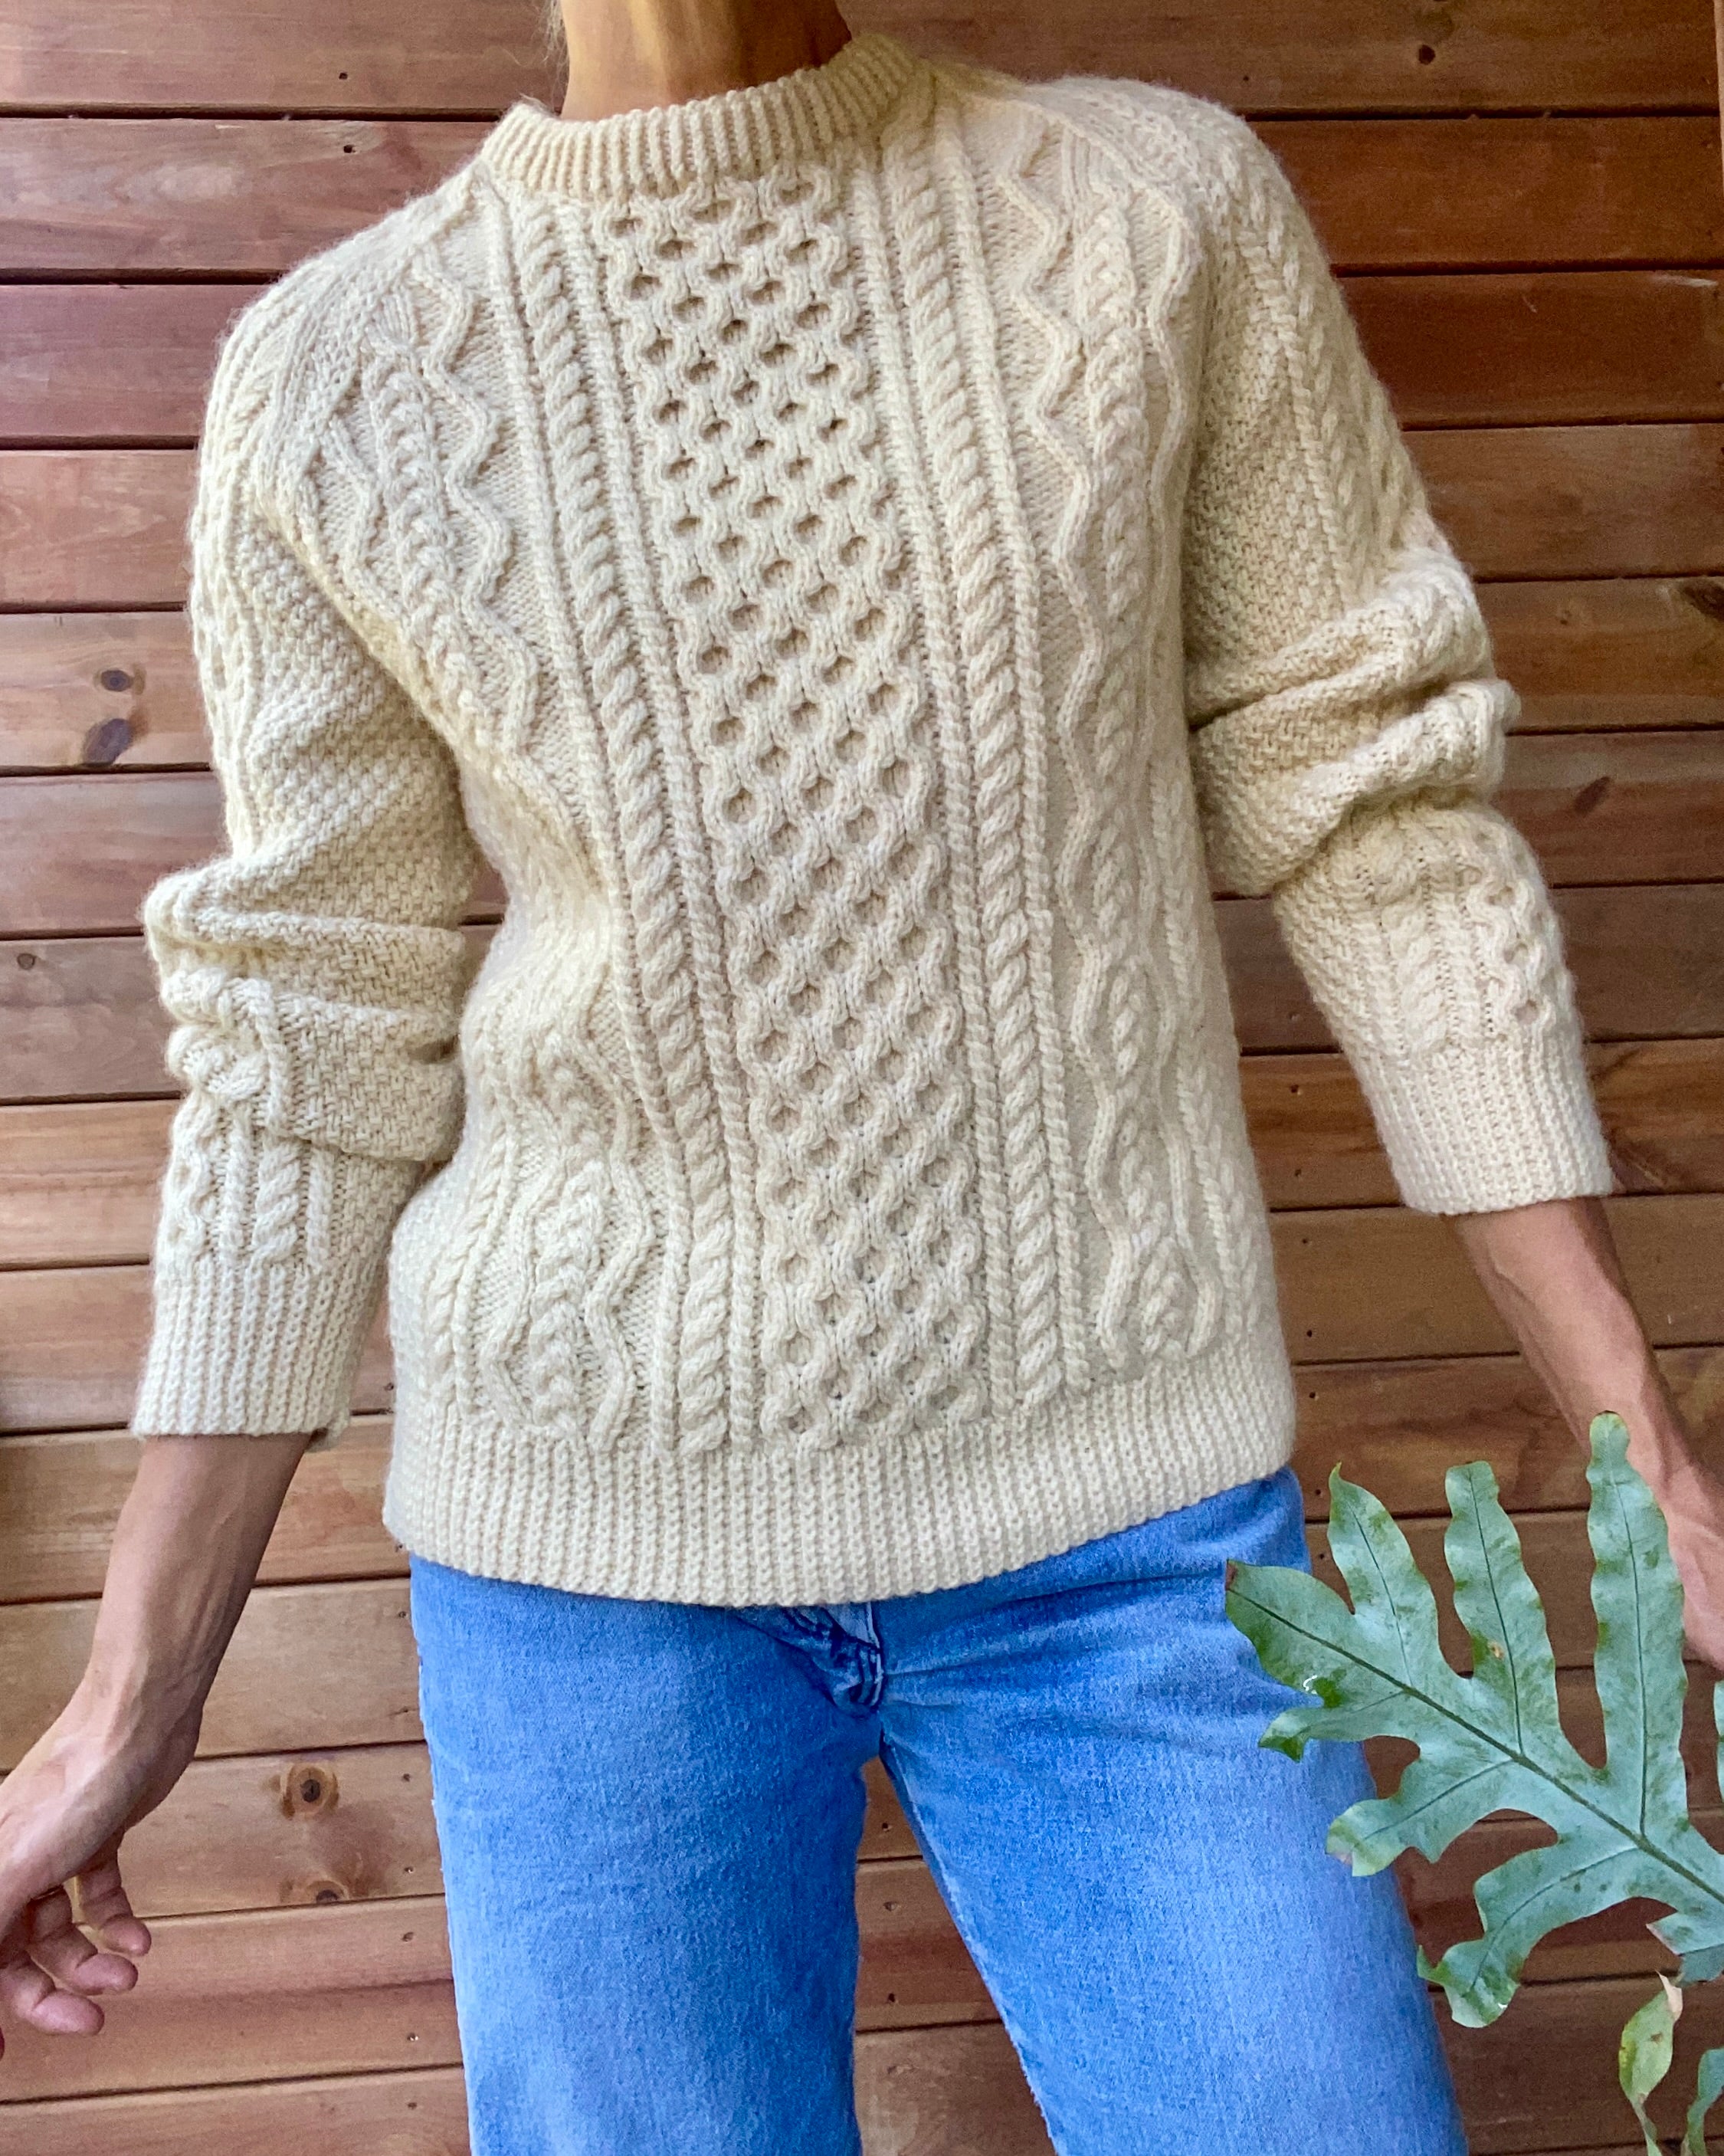 Vintage Handknit Honeycomb Cable Fisherman Sweater M